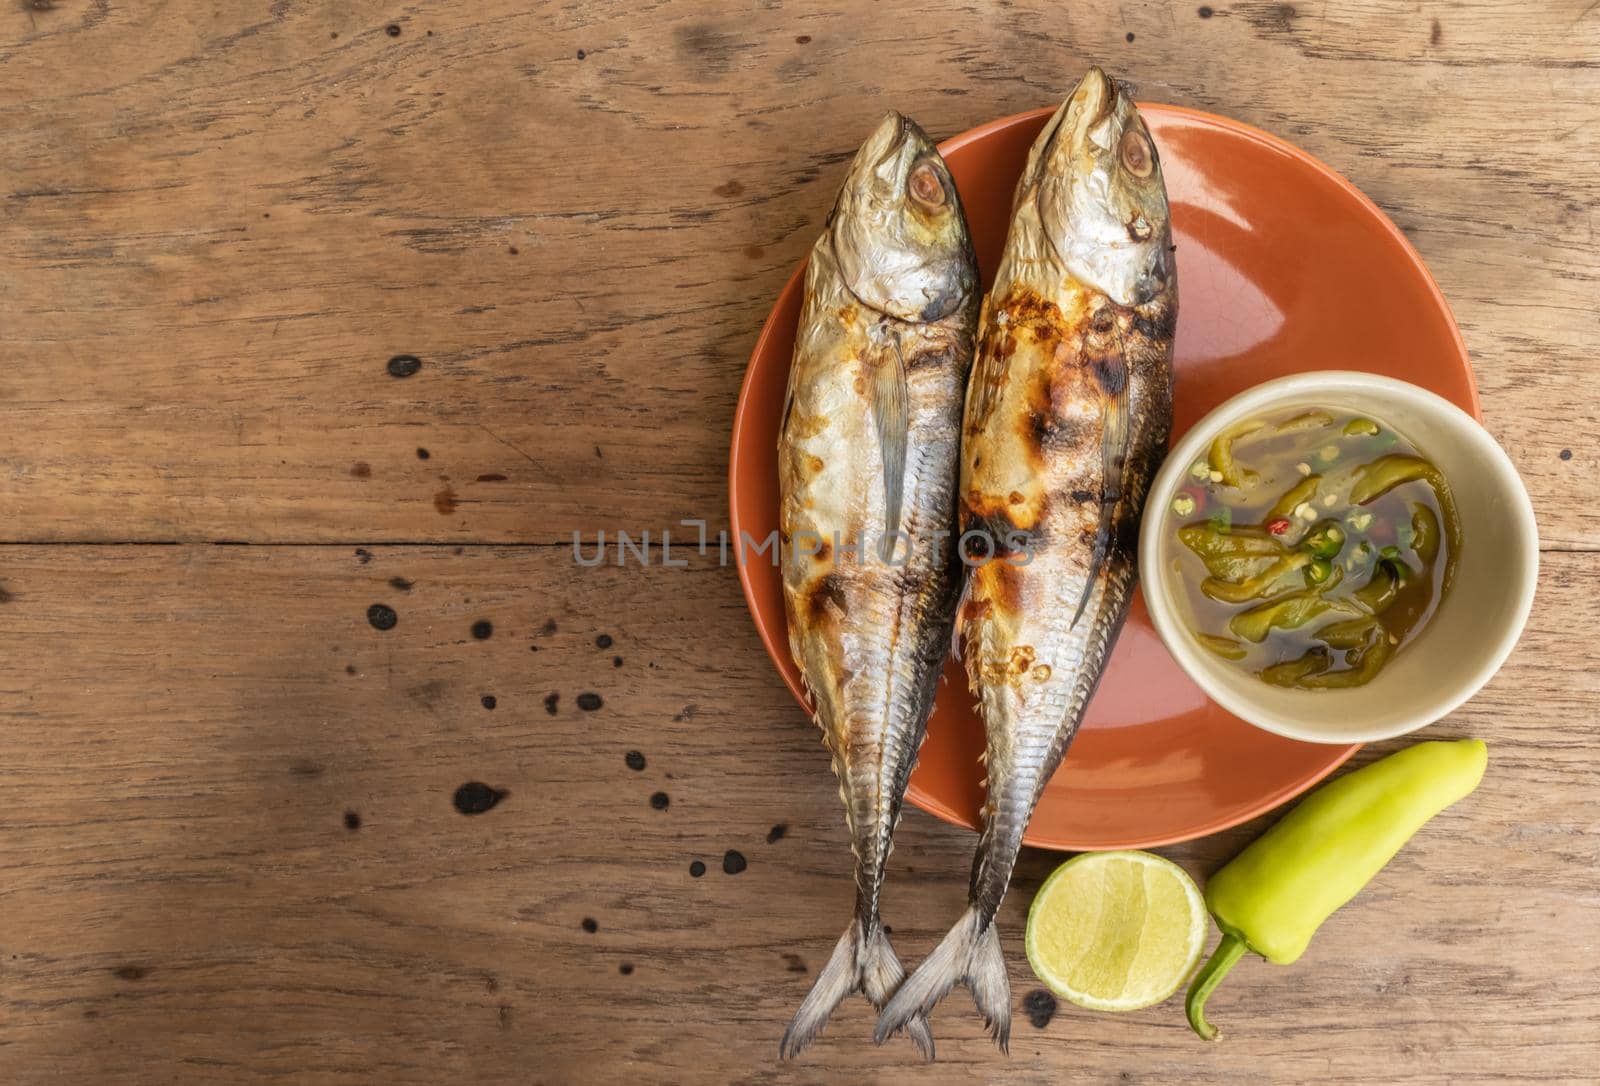 Grilled fish in plate by suththisumdeang